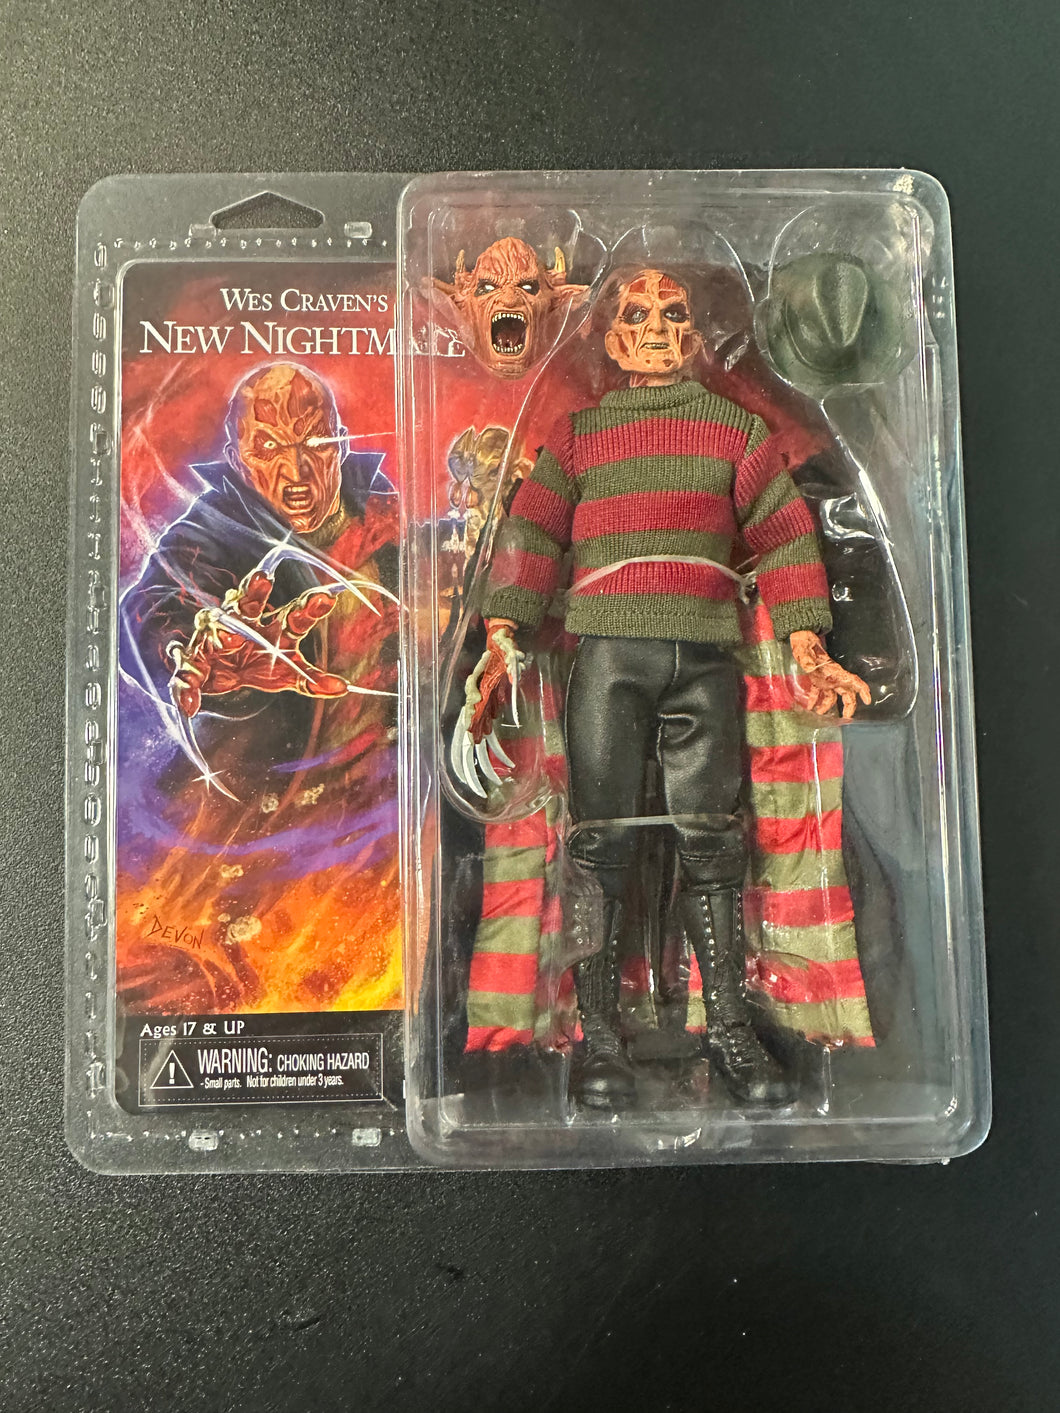 NECA REEL TOYS WES CRAVEN’S NEW NIGHTMARE FREDDY KRUEGER CLOTHED FIGURE